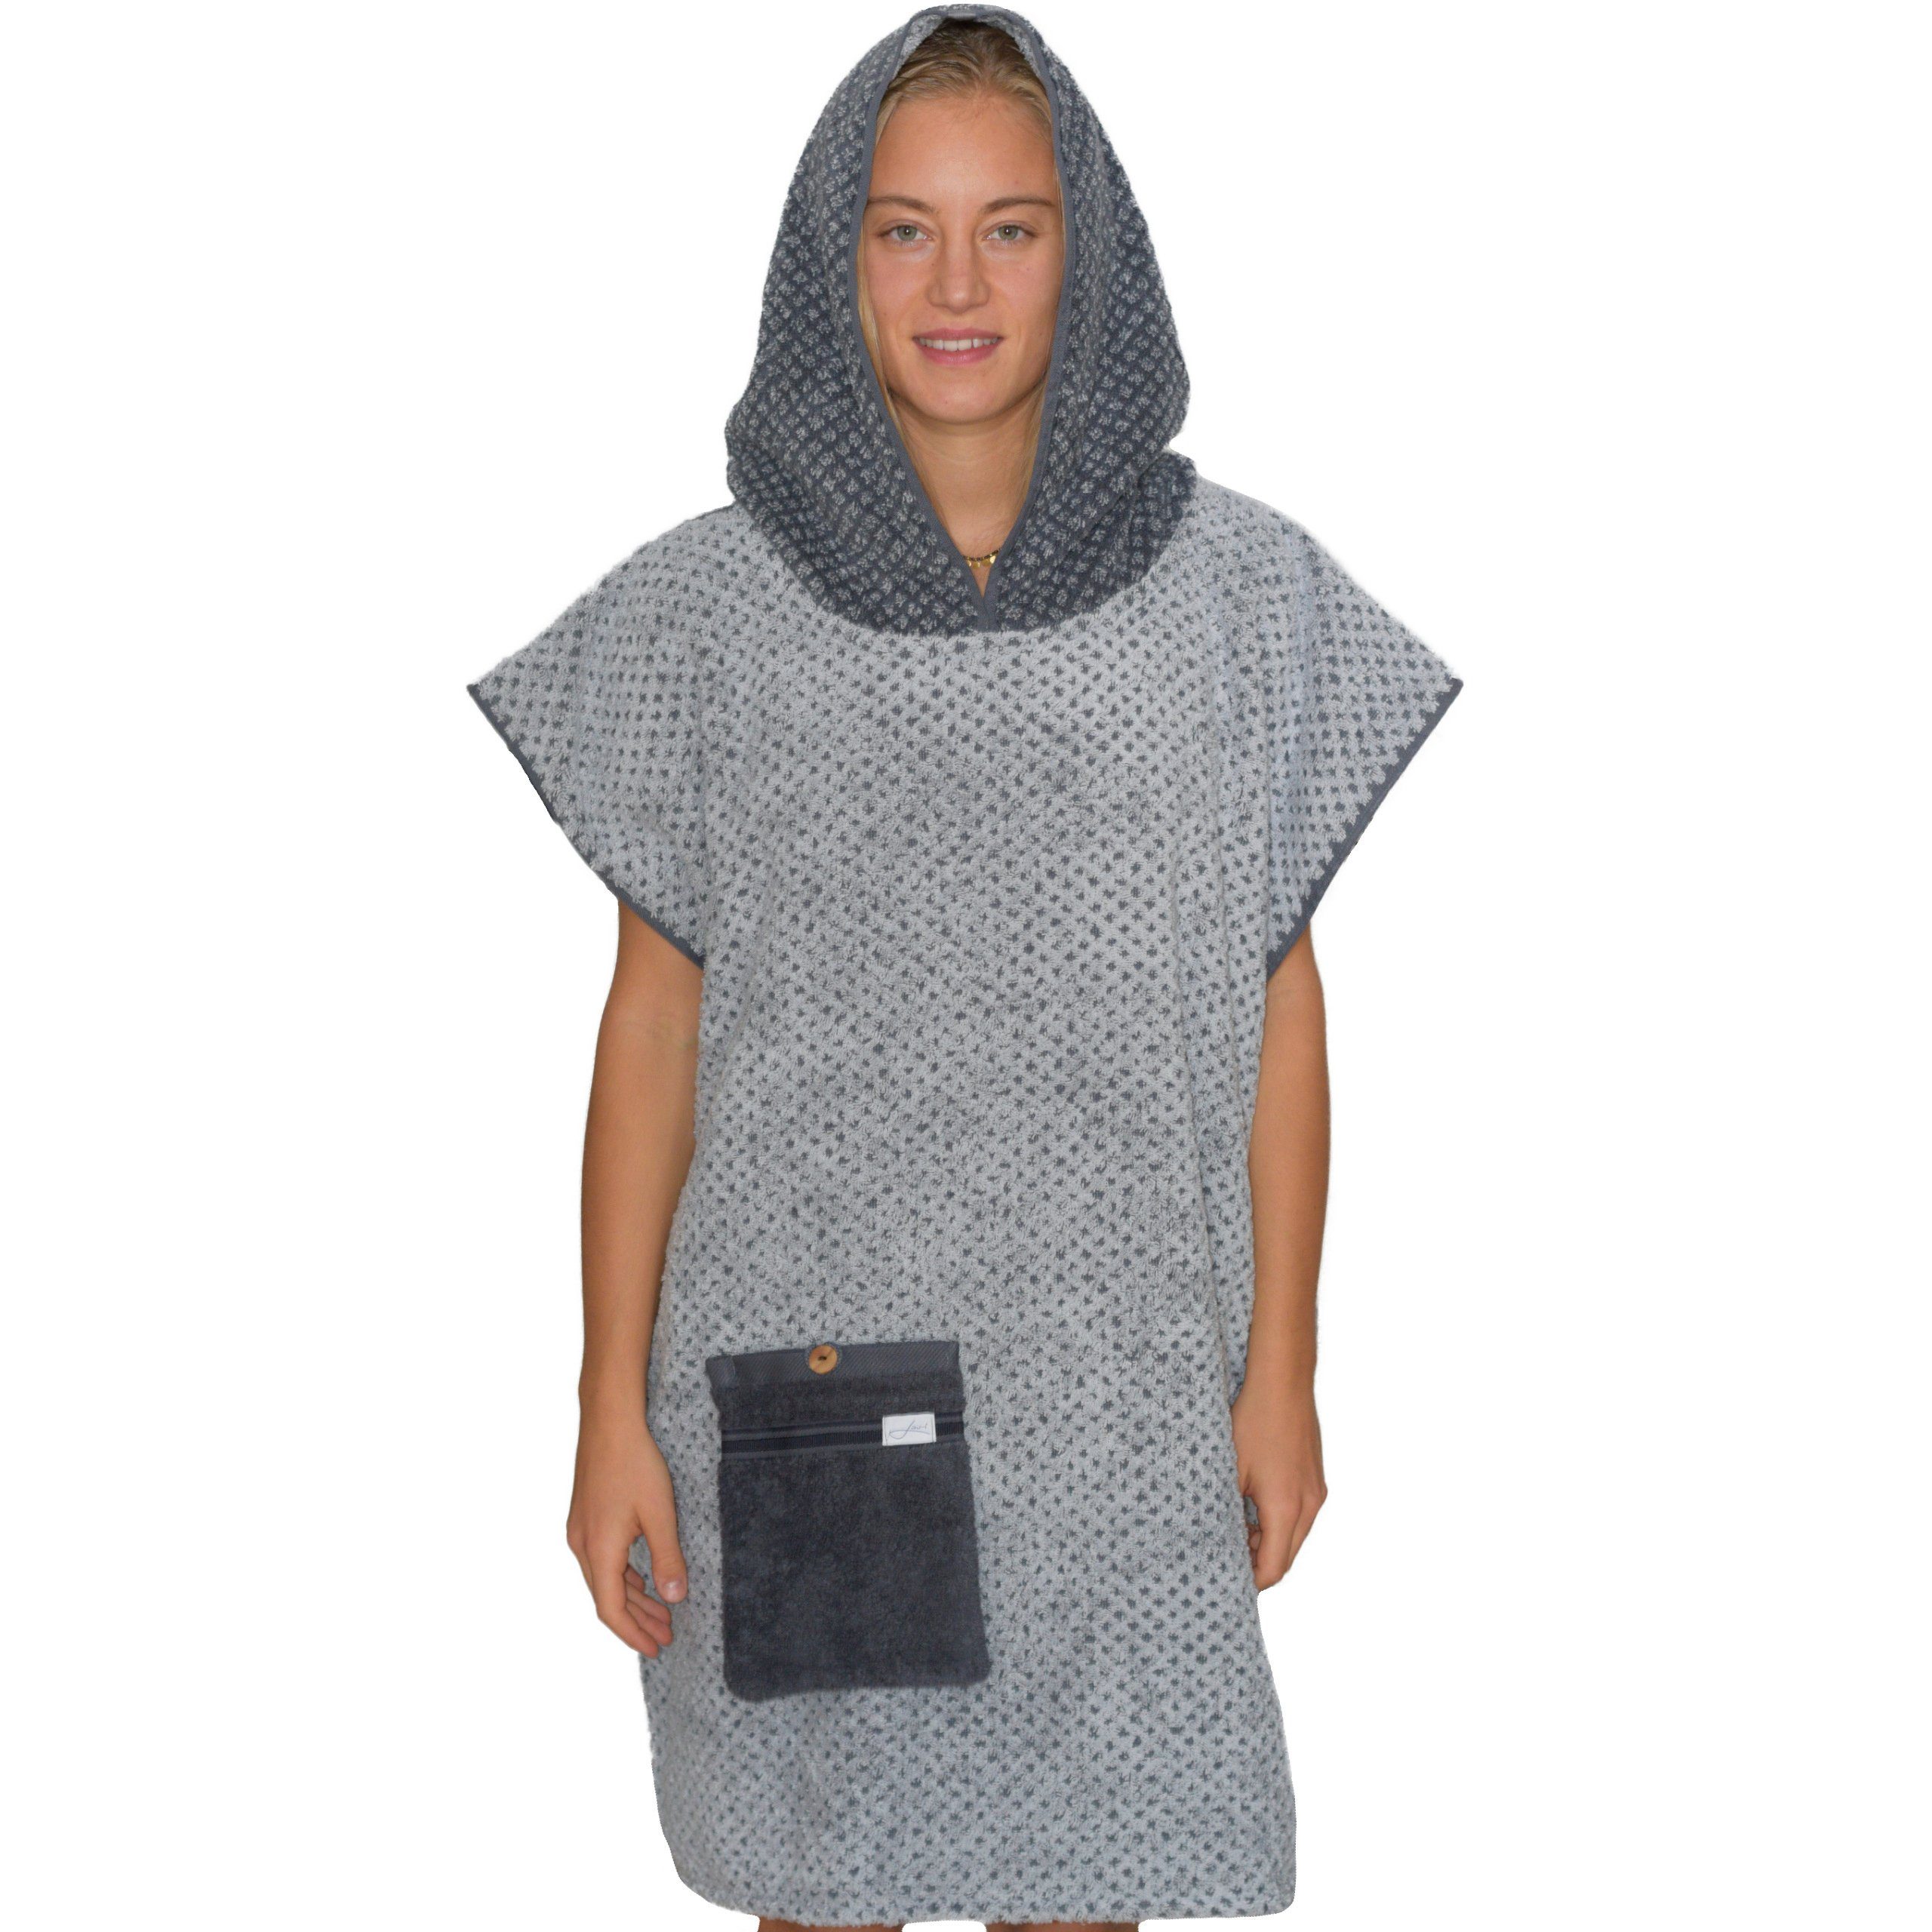 Tasche Germany Silber Kapuze Surfponcho Frottee Lou-i Erwachsene Made Badeumhang, Badeponcho Kapuze, in und mit